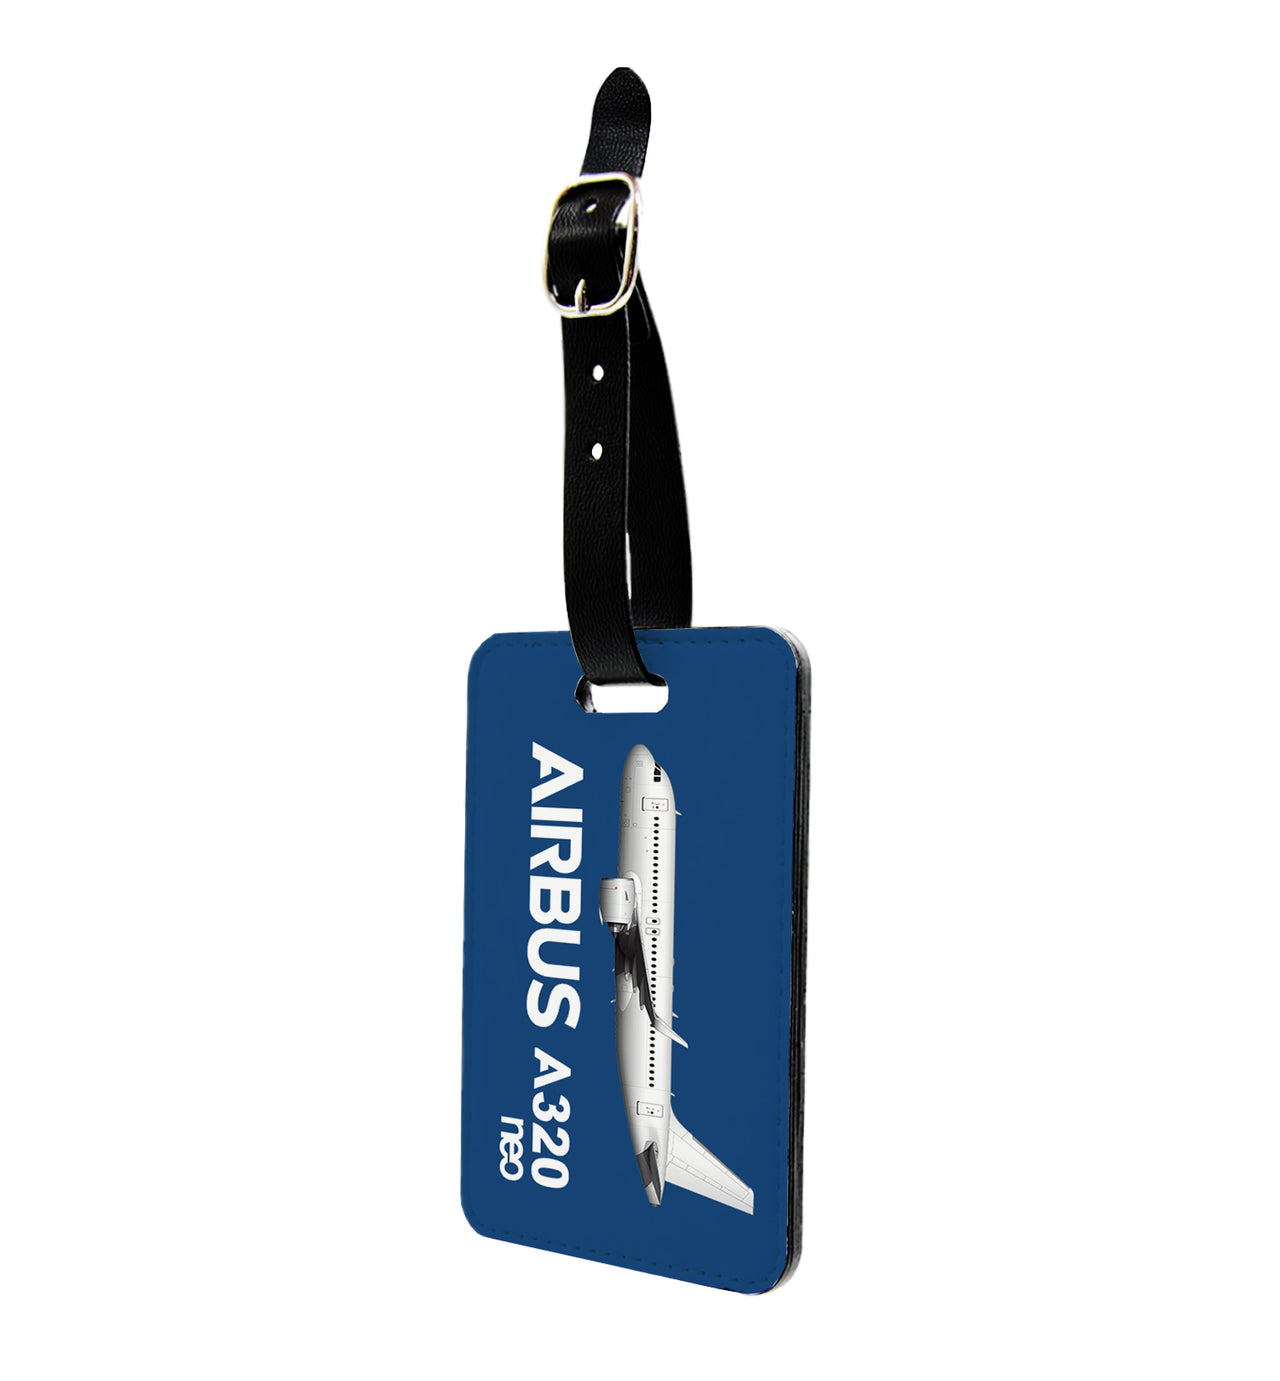 The Airbus A320Neo Designed Luggage Tag